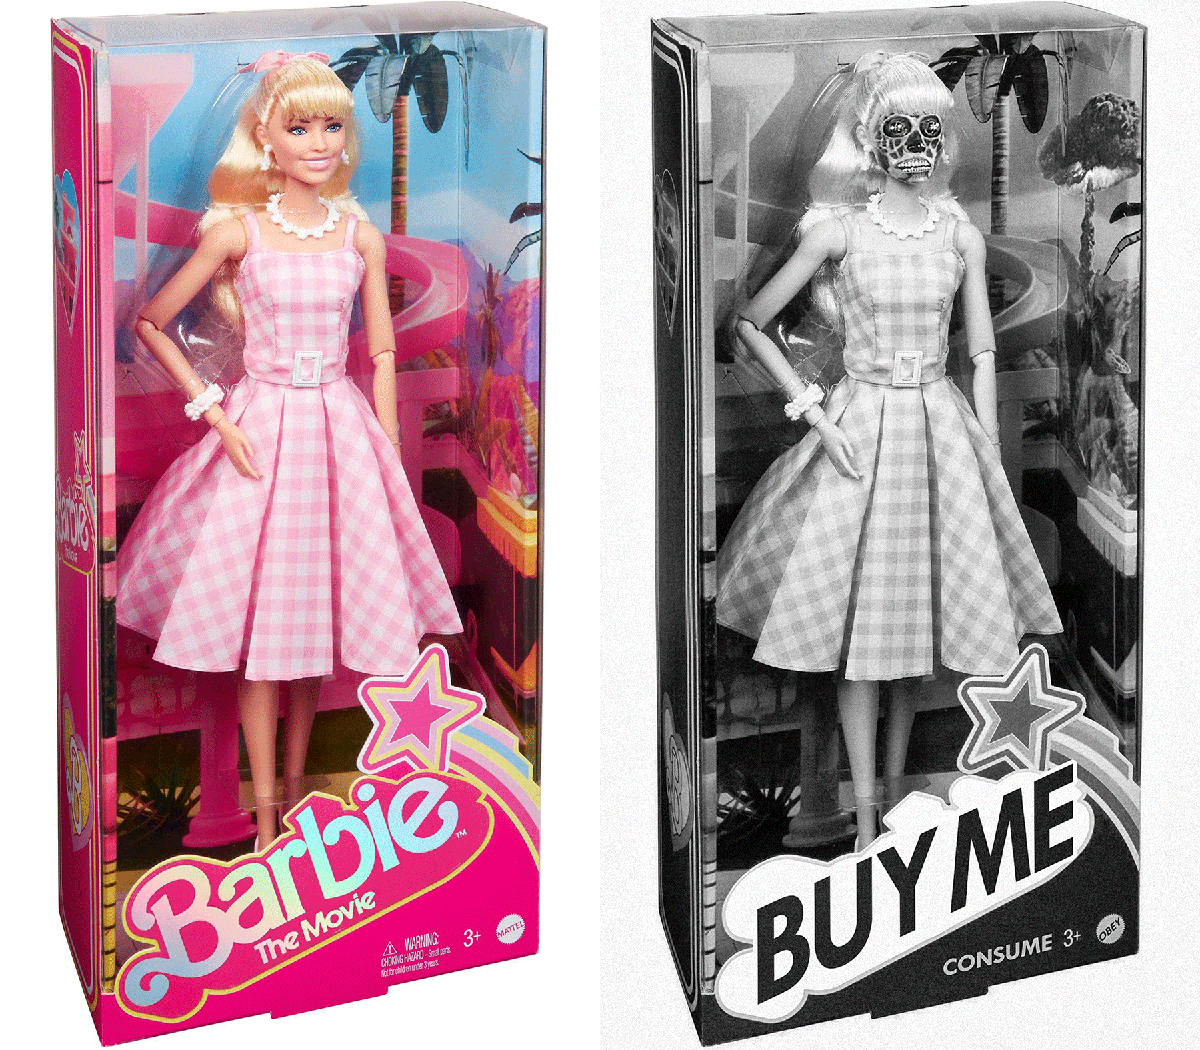 dank memes - margot robbie barbie doll - The Movie Kung 3 Panor The 99 Buyme Consume 3.